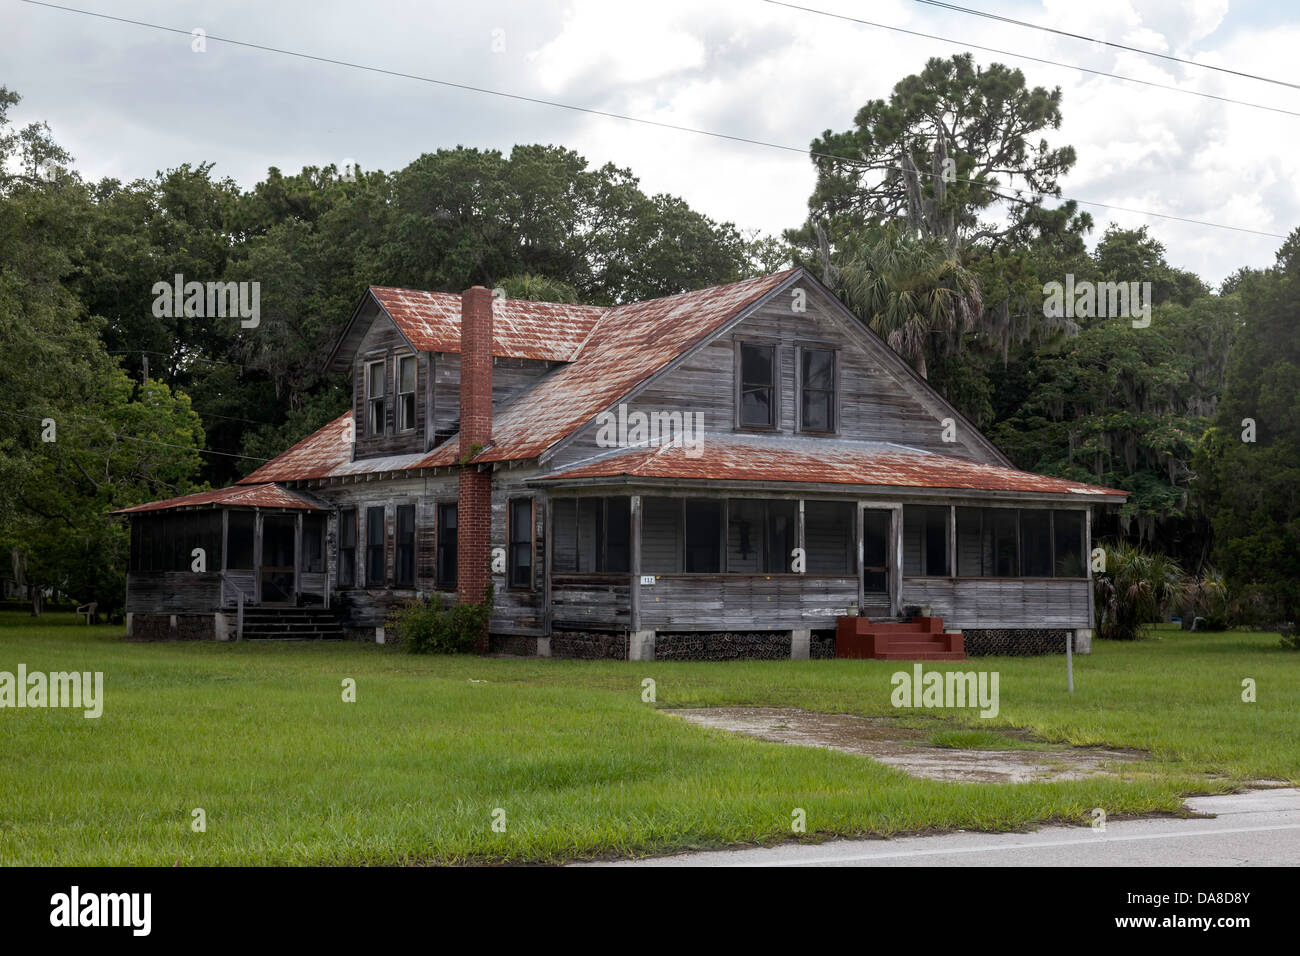 Weathered old Florida farmhouse with red brick chimney, dormer, rusting metal roof and broad verandas in Ingles, Florida. Stock Photo